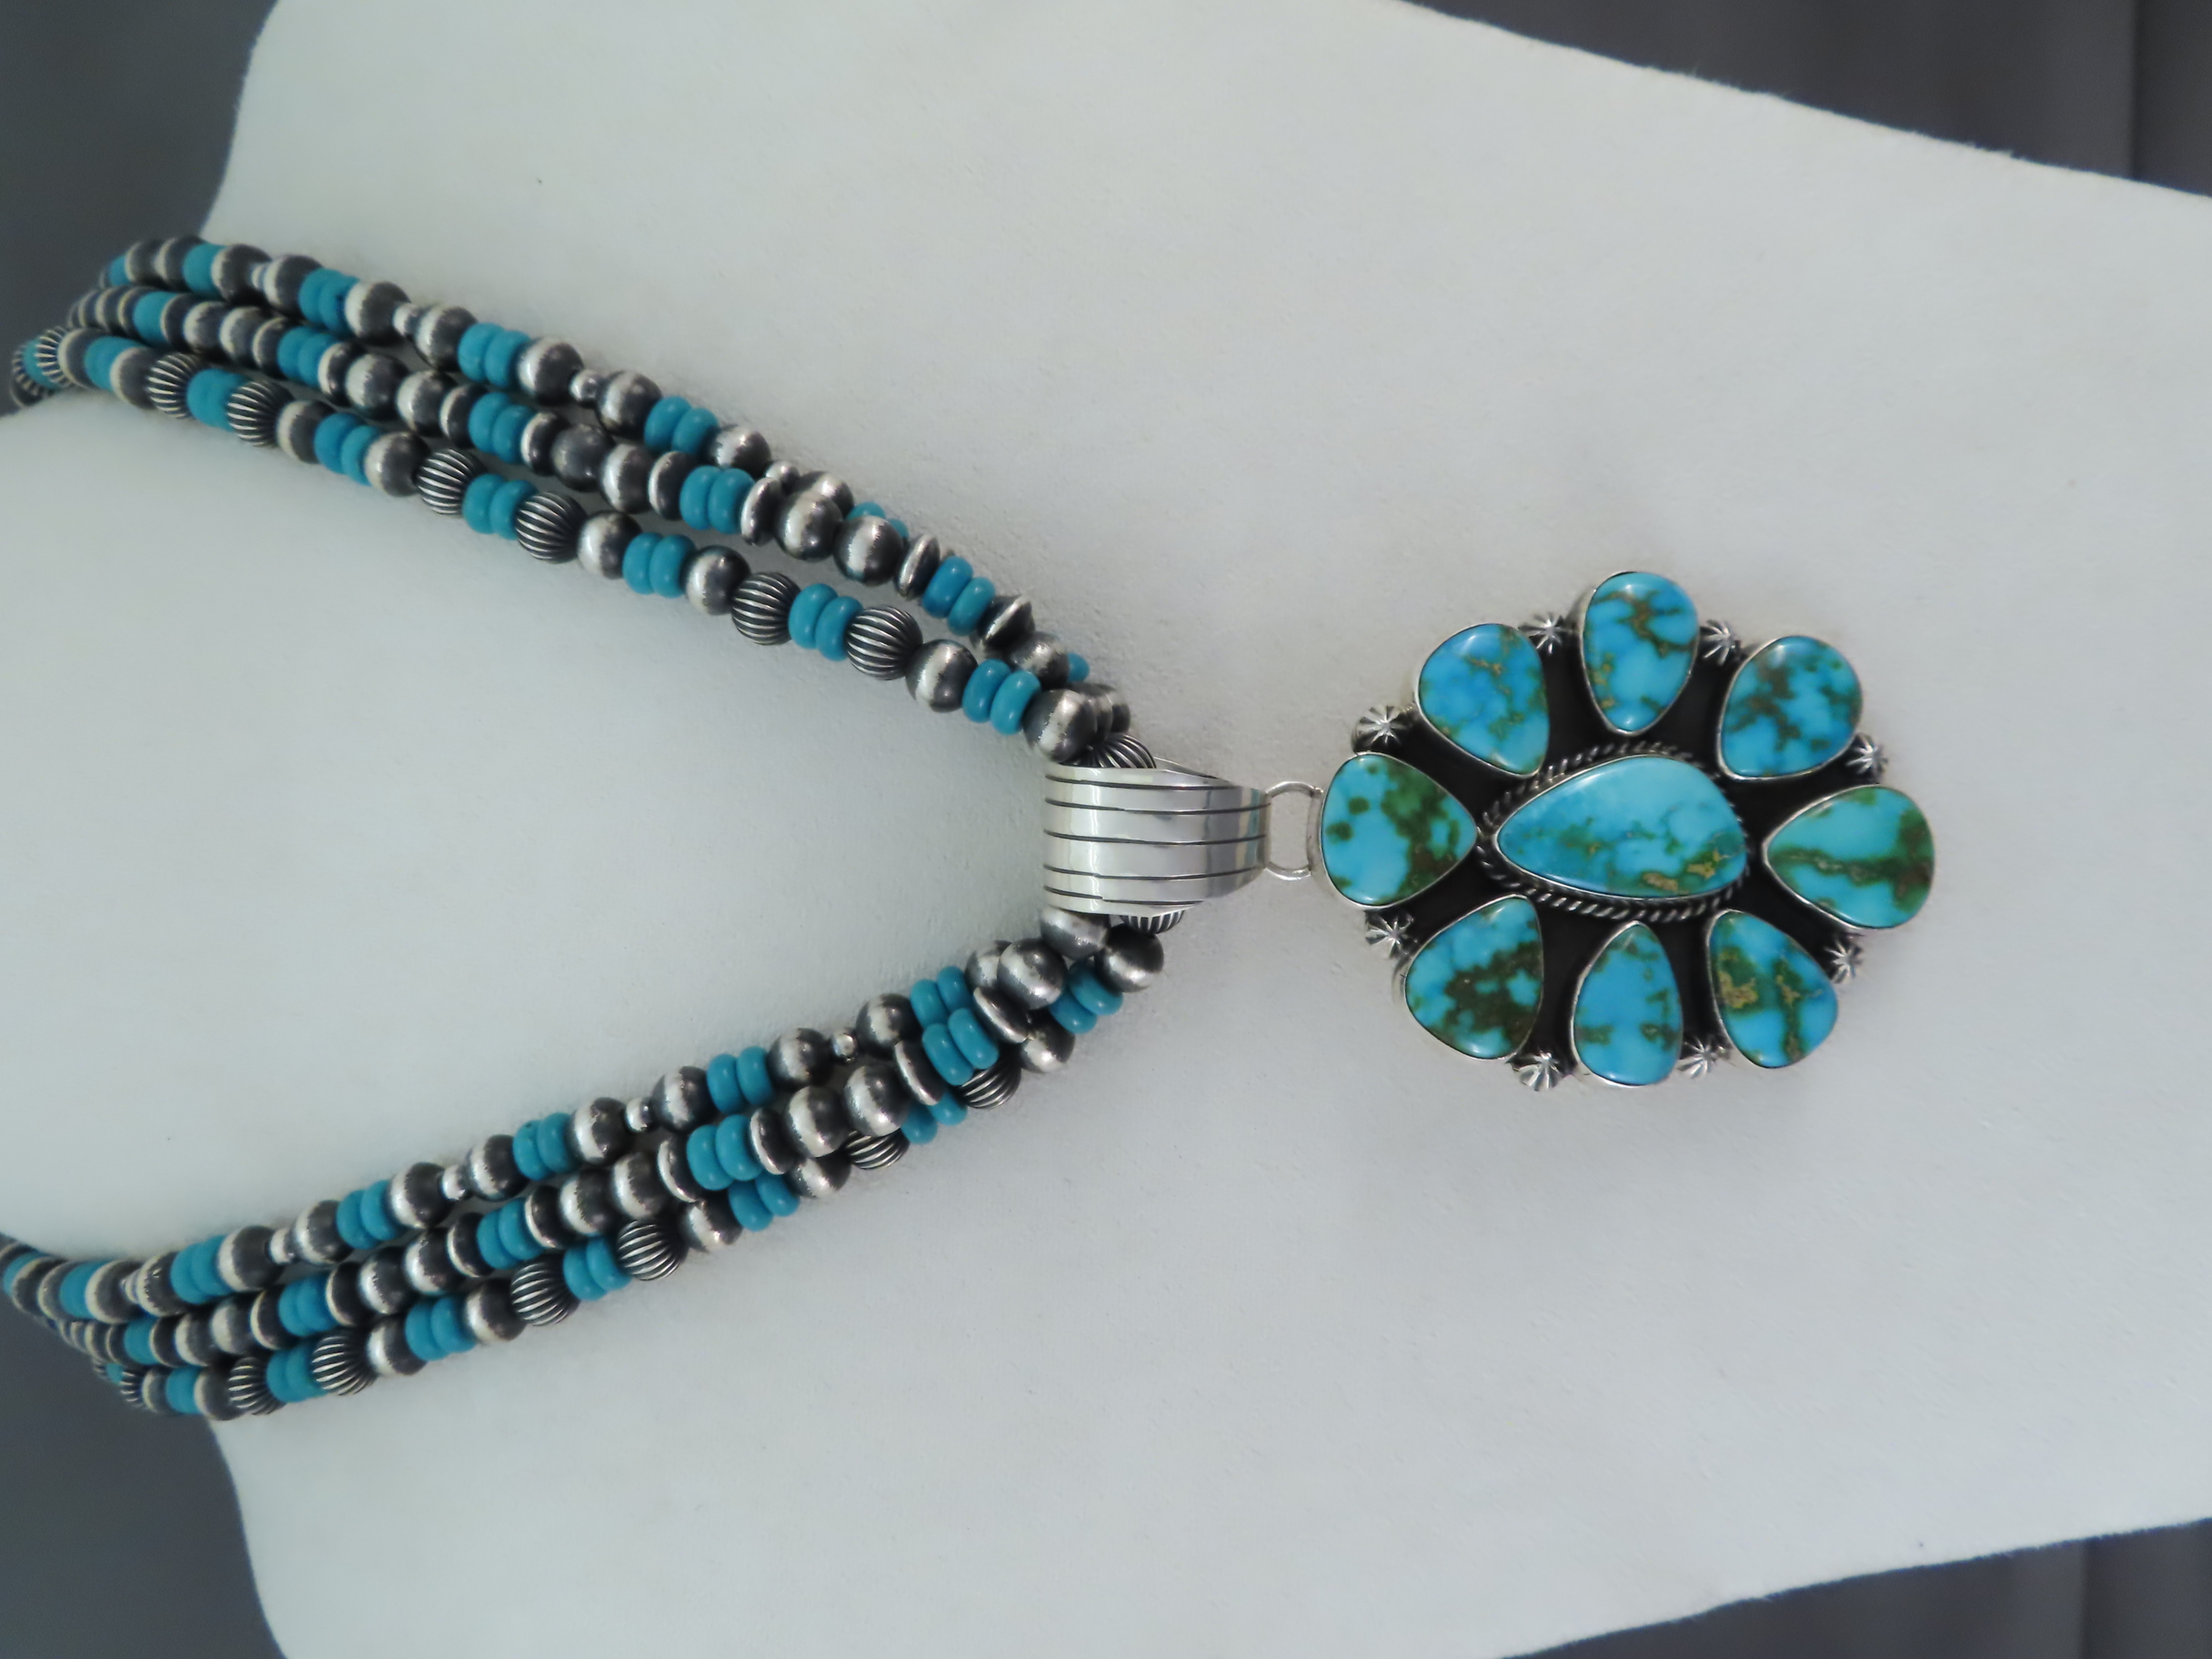 Shop Turquoise Jewelry - Sonoran Gold Turquoise Pendant Necklace by Navajo Indian jeweler, Linda Yazzie $2,100- FOR SALE